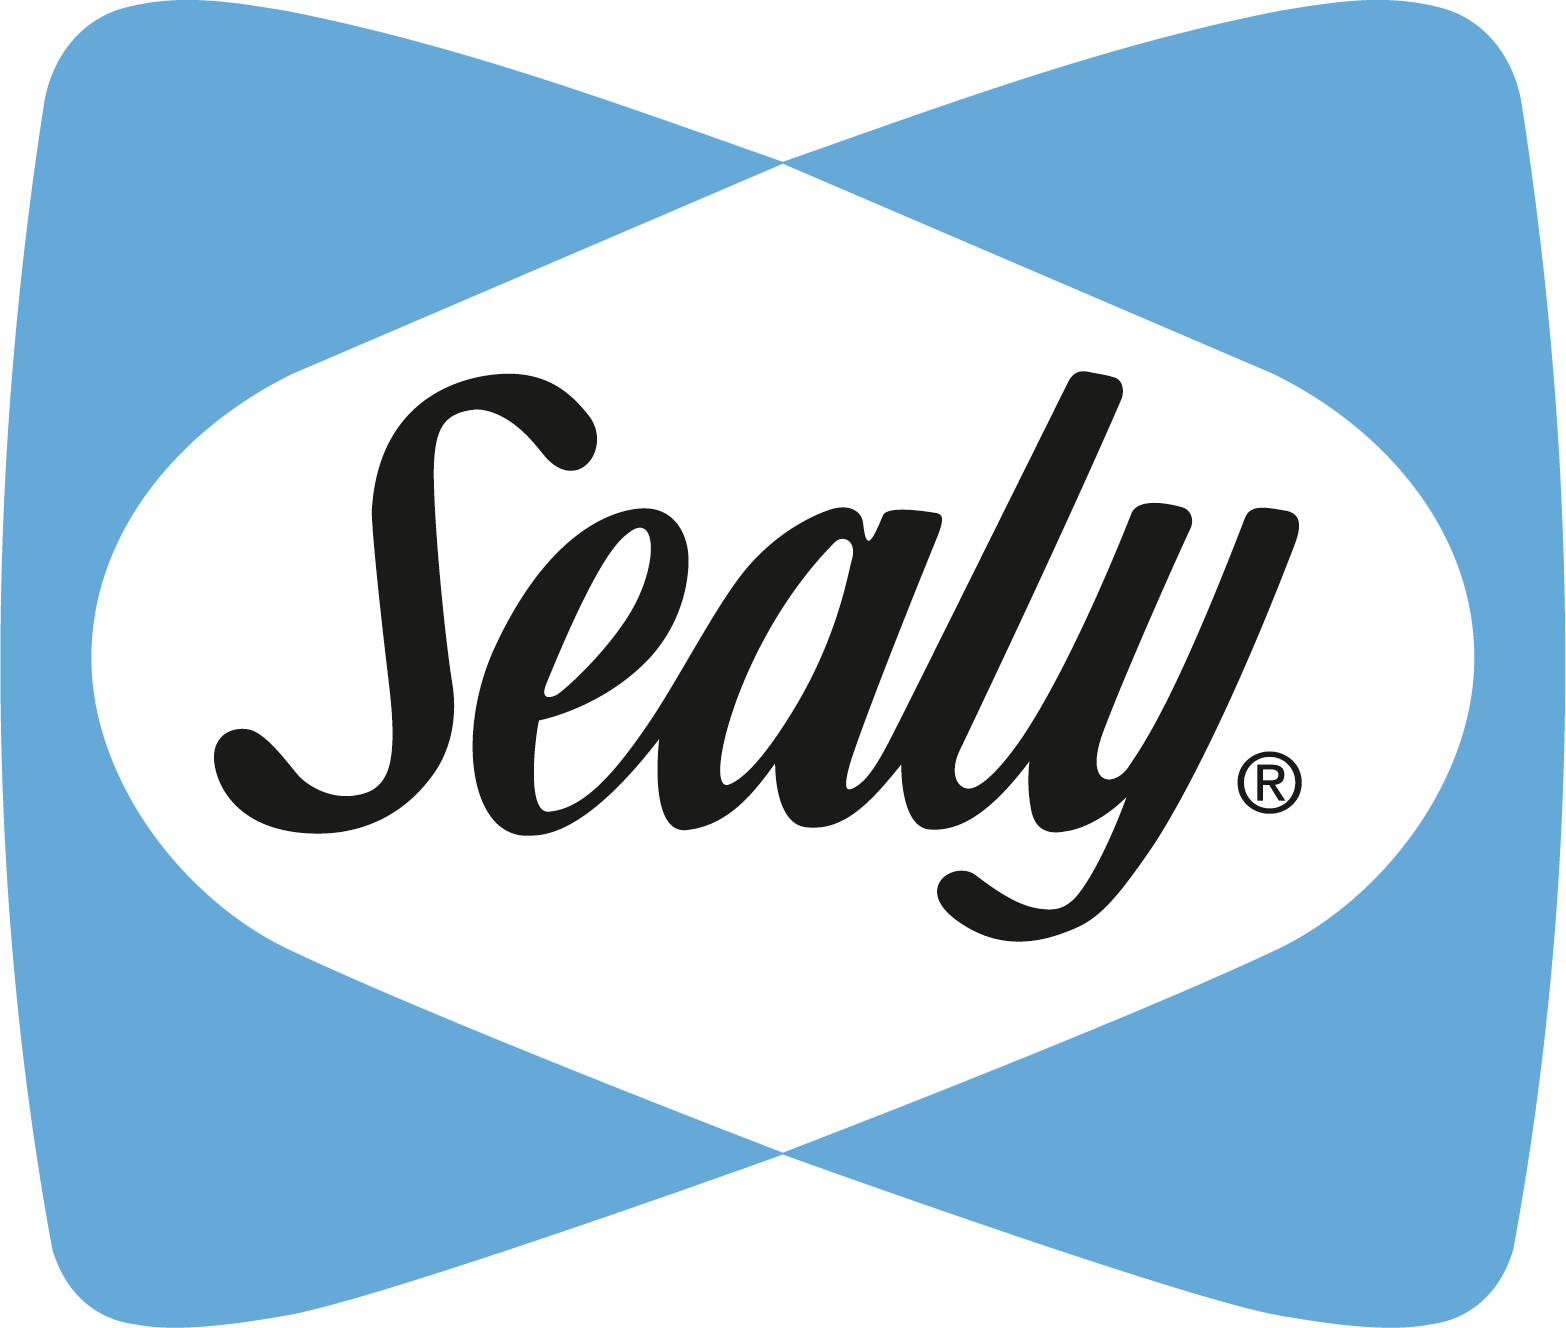 Sealy butterfly